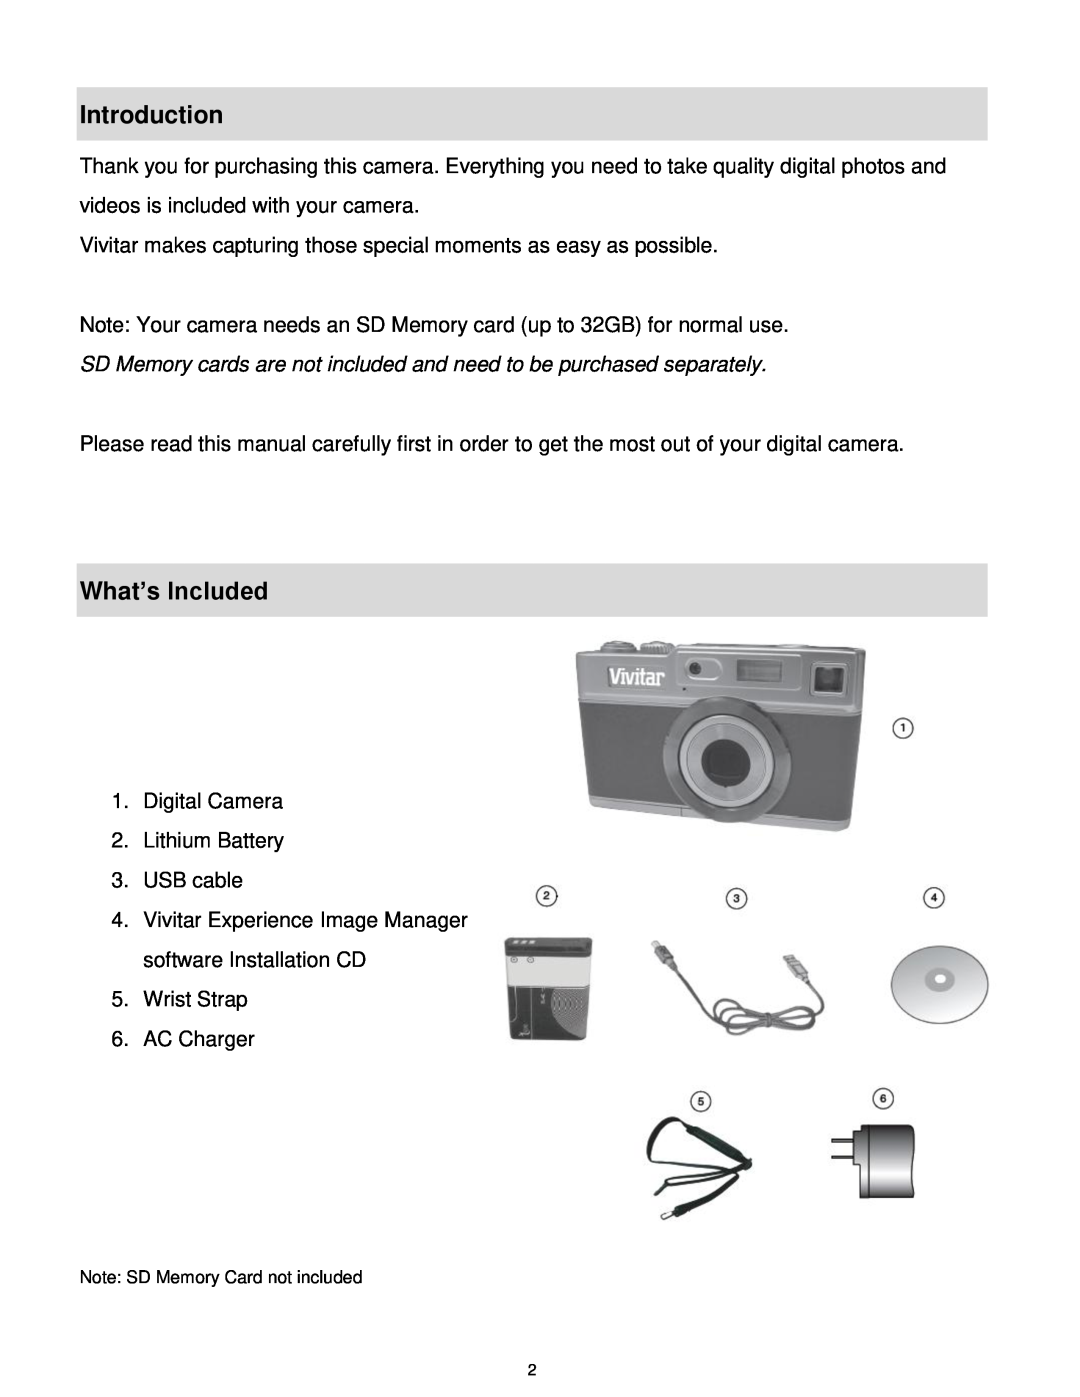 Vivitar T327 user manual Introduction, What’s Included 